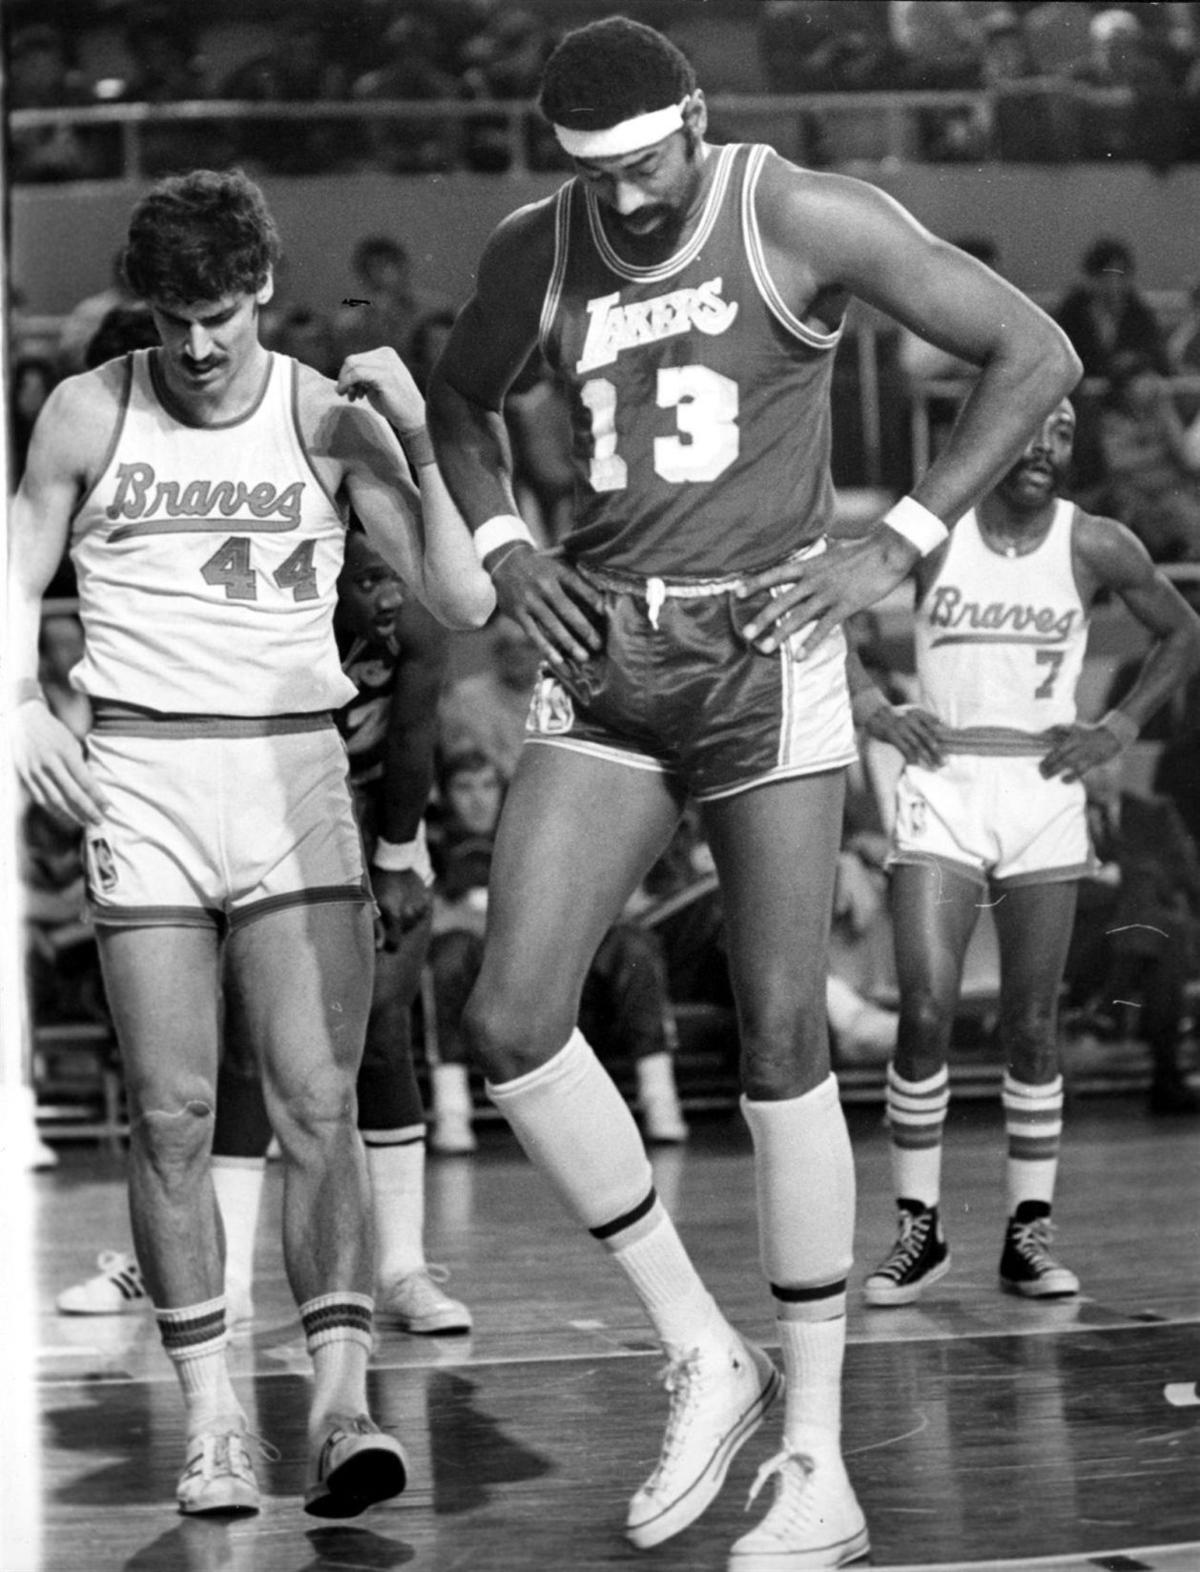 Buffalo Braves debuted 46 years ago today